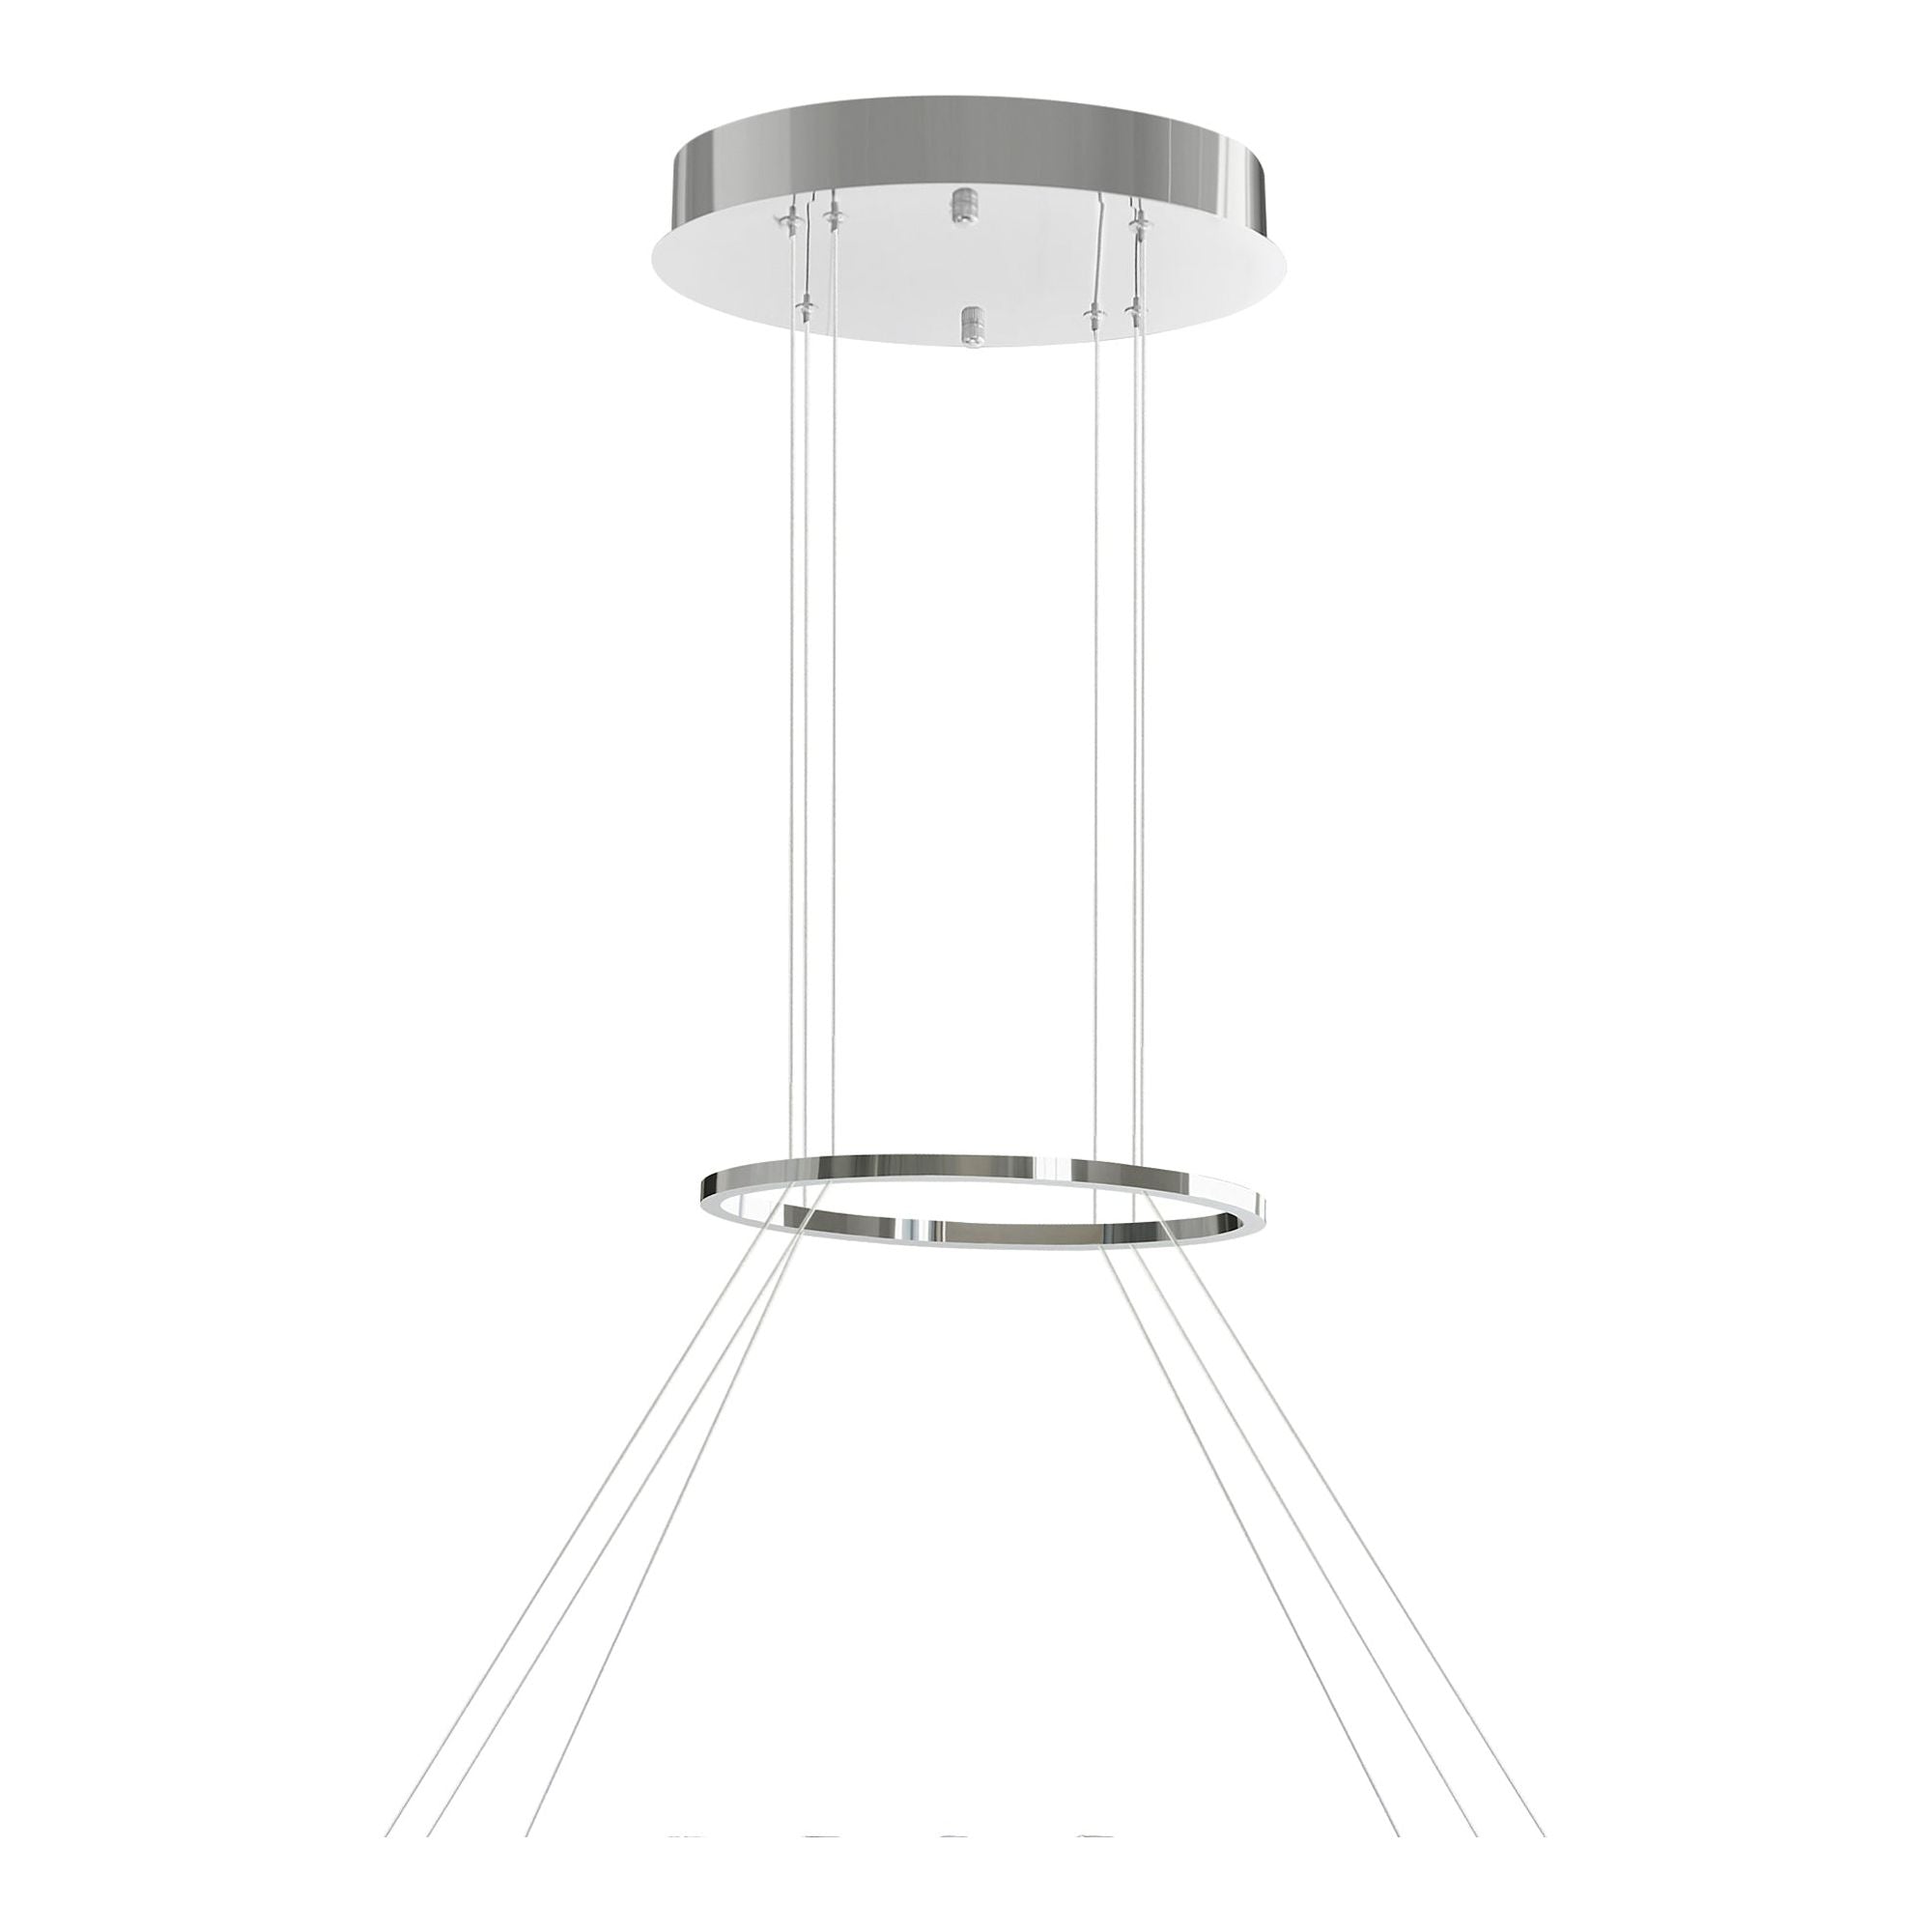 Glace LED Linear Chandelier